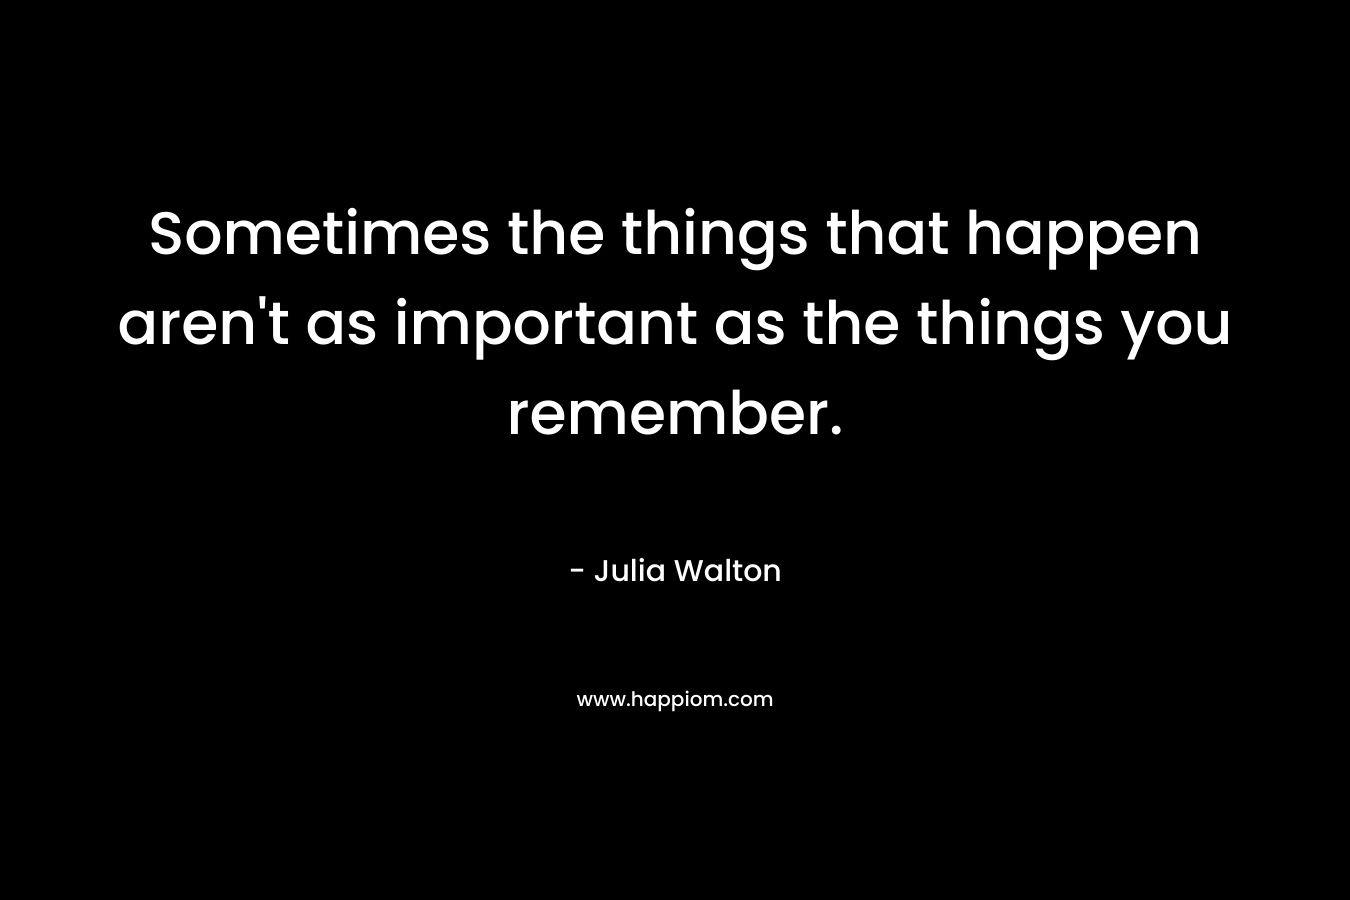 Sometimes the things that happen aren't as important as the things you remember.